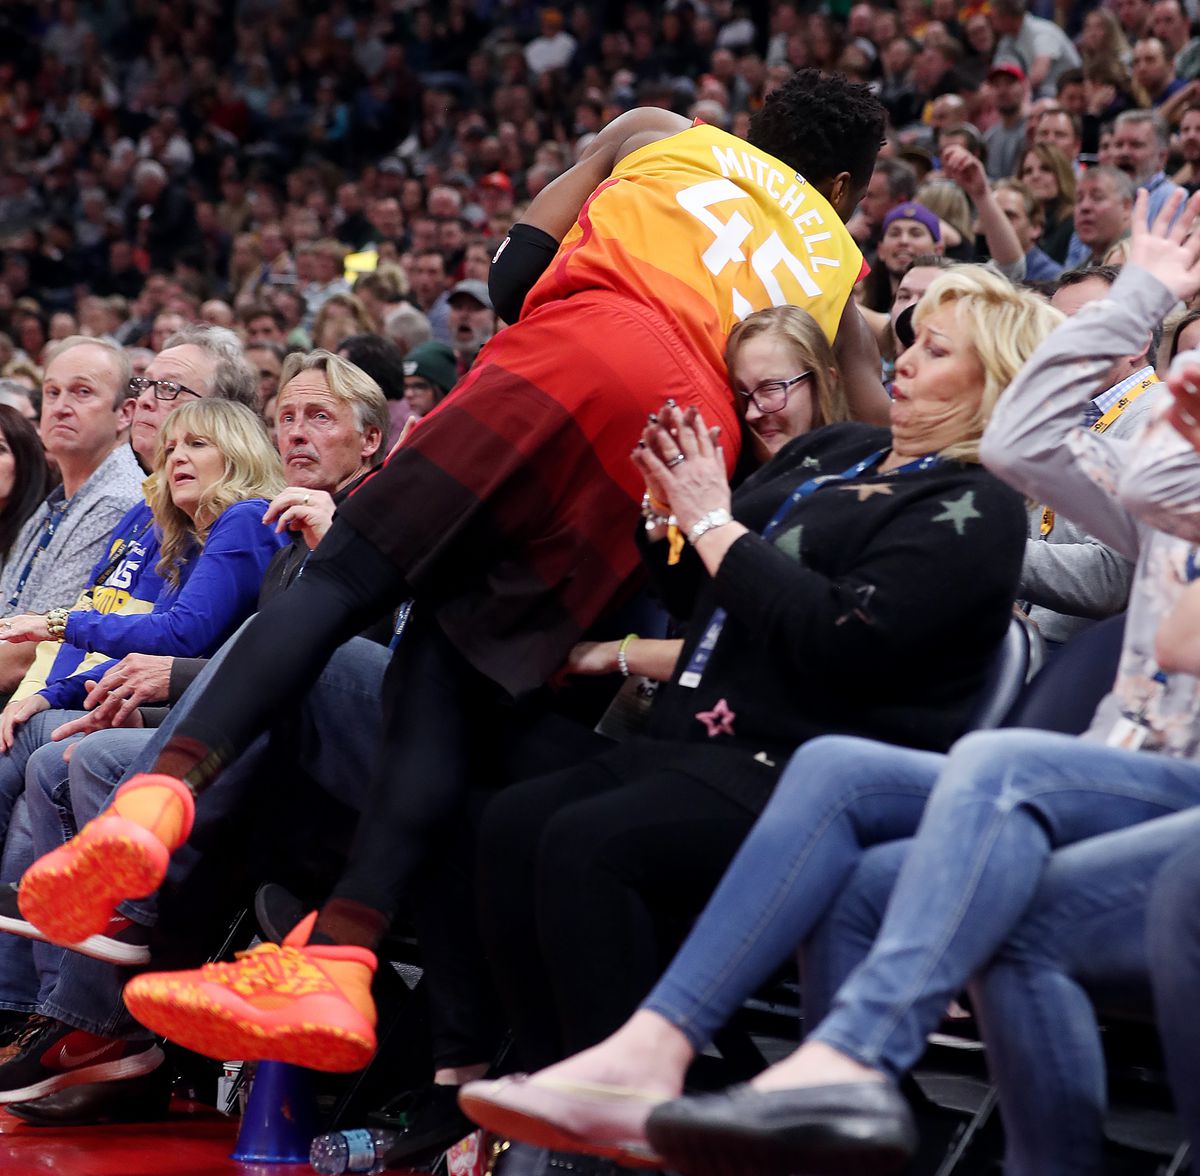 Utah Jazz guard Donovan Mitchell (45) crashes into the front two rows as the Utah Jazz and the Golden State Warriors play an NBA basketball game at Vivint Smart Home Arena in Salt Lake City on Wednesday, Dec. 19, 2018. Jazz won 108-103.